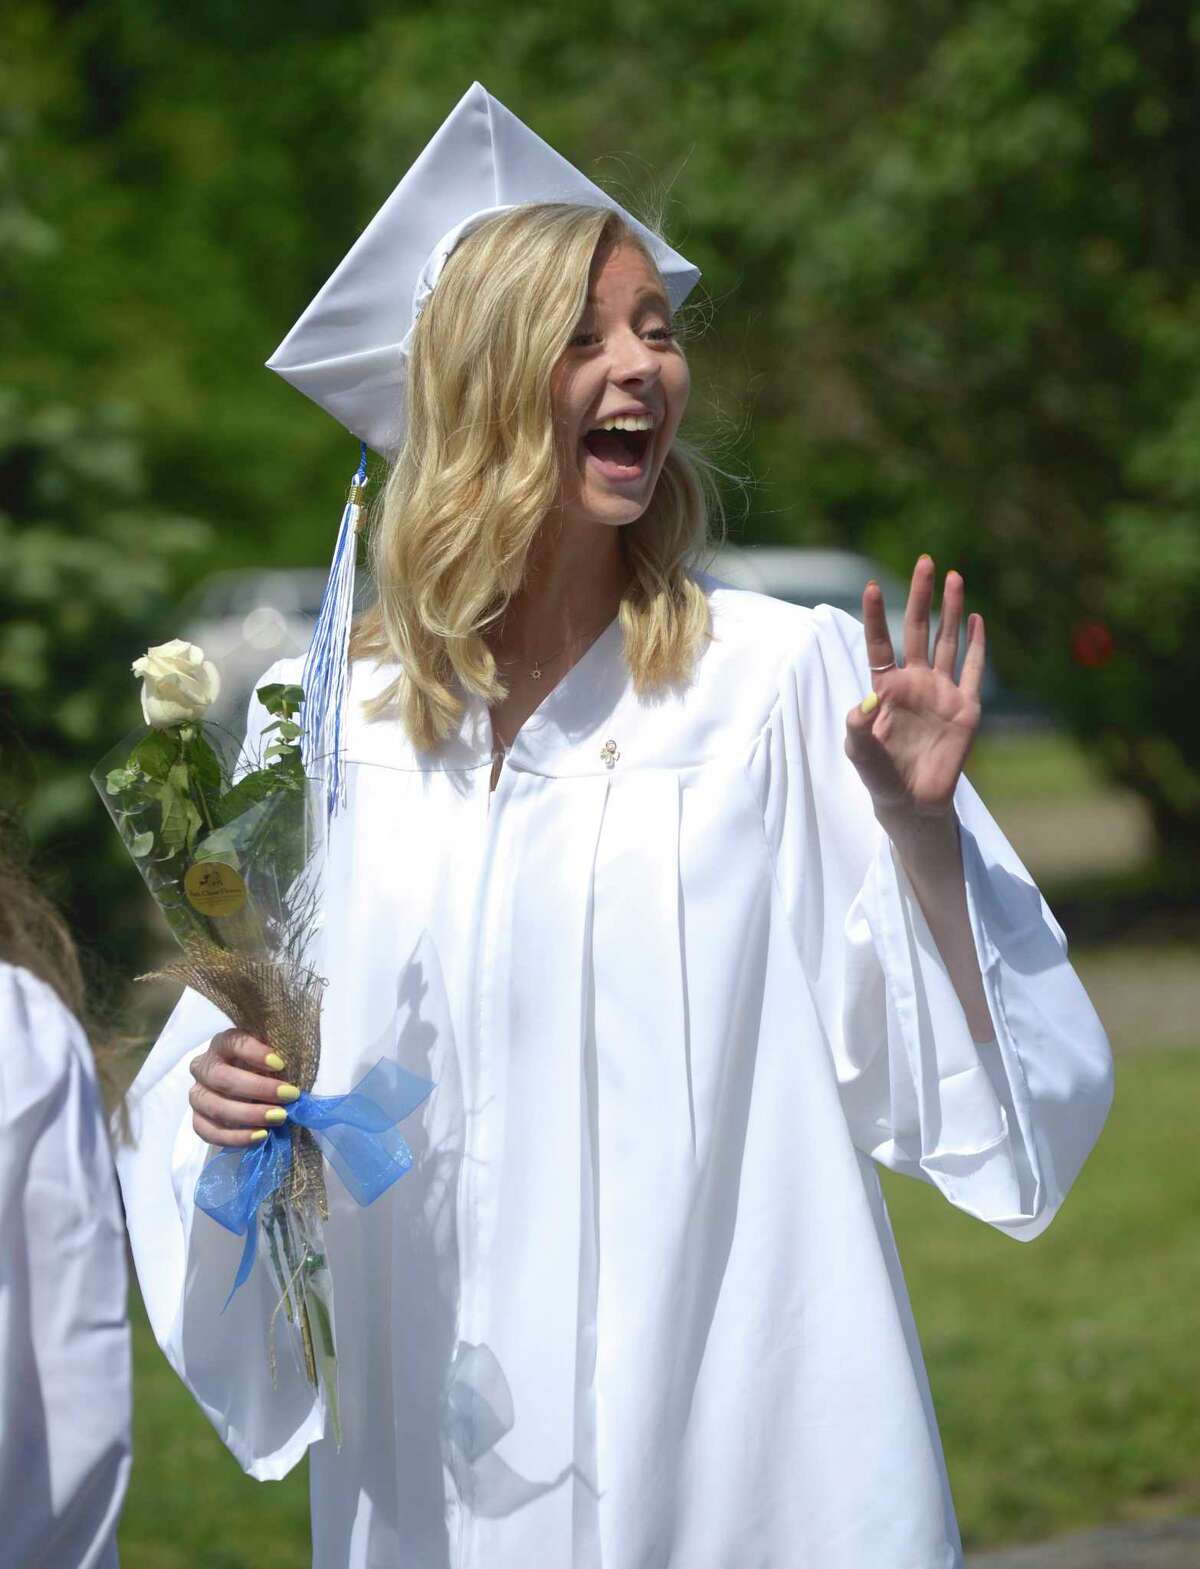 Lana Marie DelVecchio, of Bridgewater, waves during the procession for the Shepaug Valley High School Class of 2019 Commencement, Saturday morning, June 15, 2019, on the Bryan Memorial Town Hall lawn, Washington, Conn.